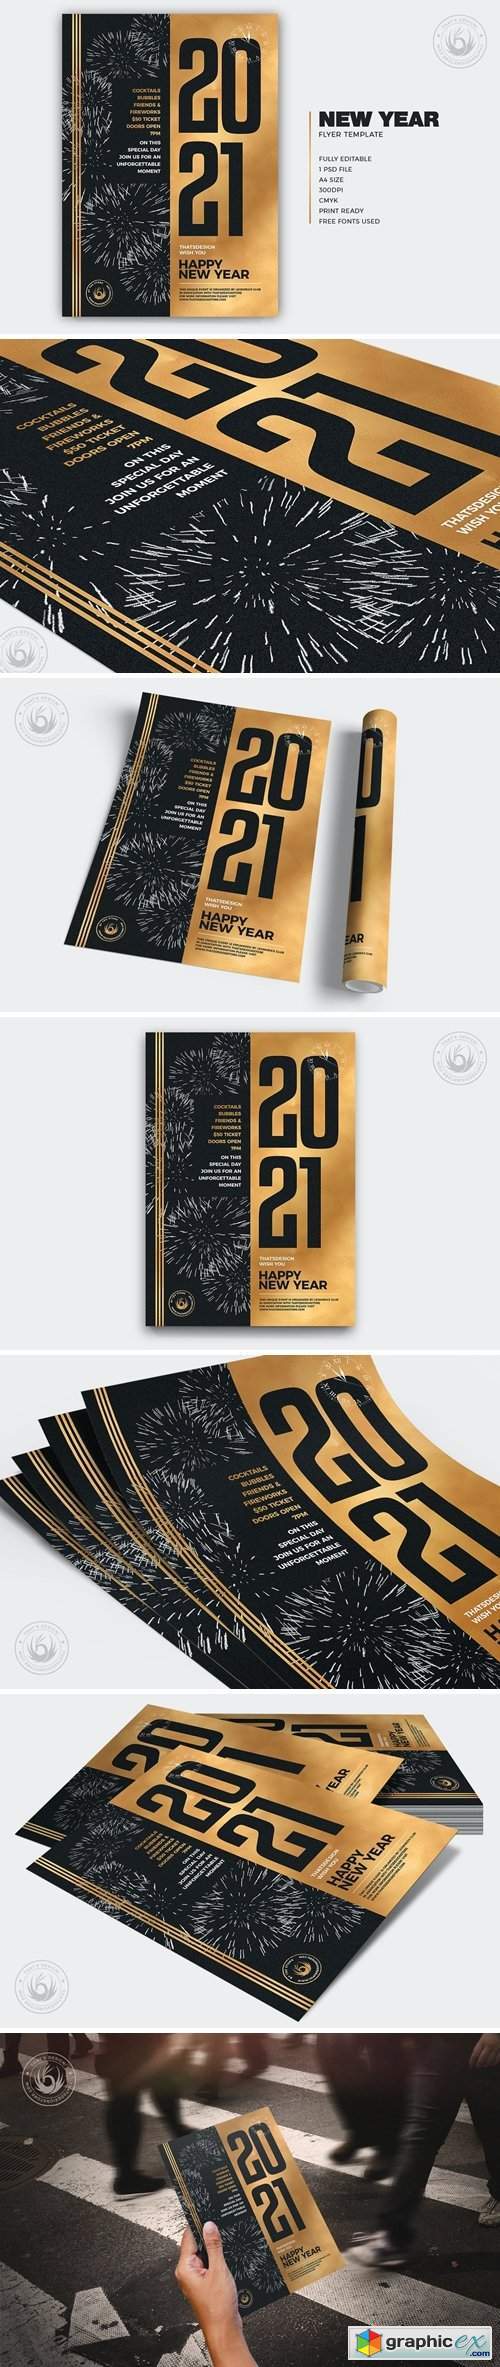 New Year Flyer Template V9